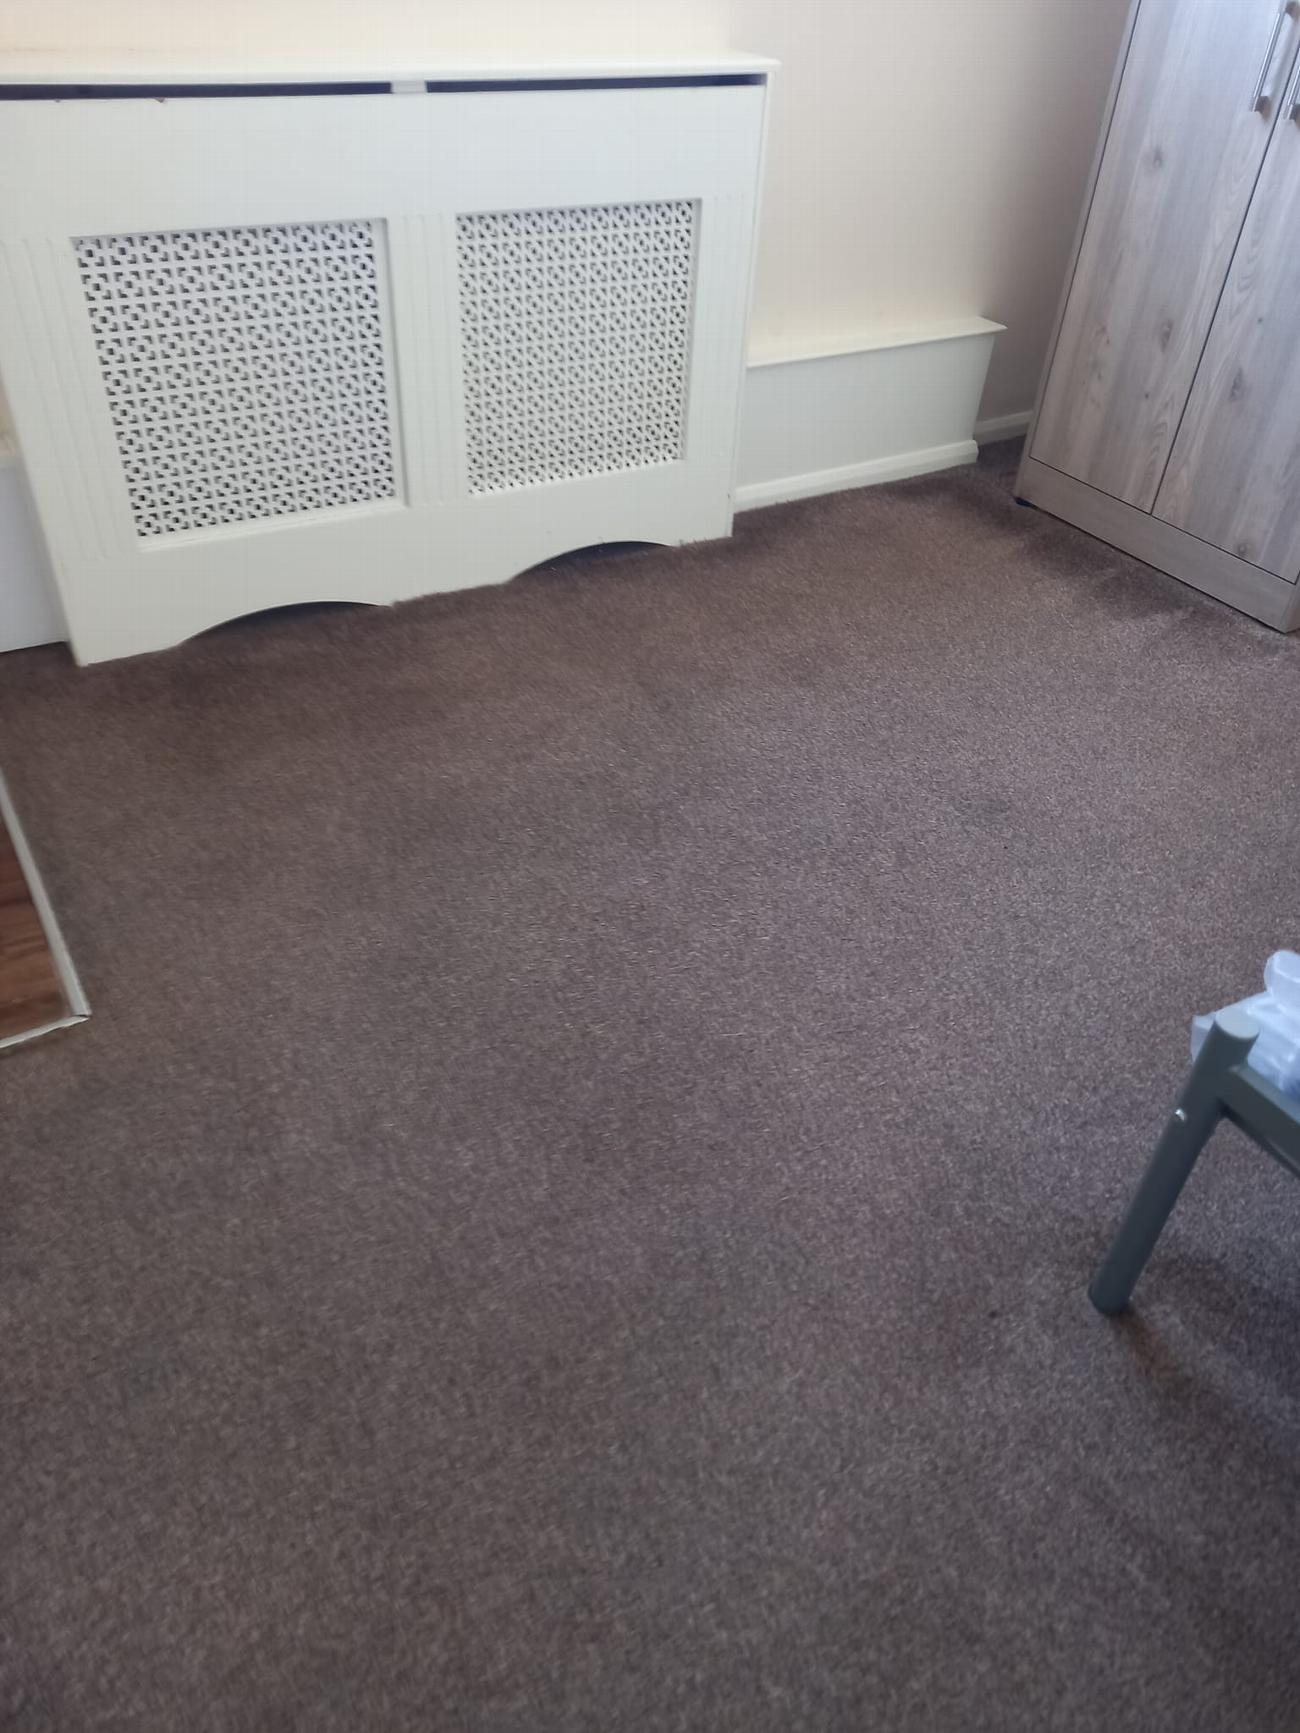 Carpet cleaning in Colchester | BCC - Best Carpet Cleaning gallery image 4